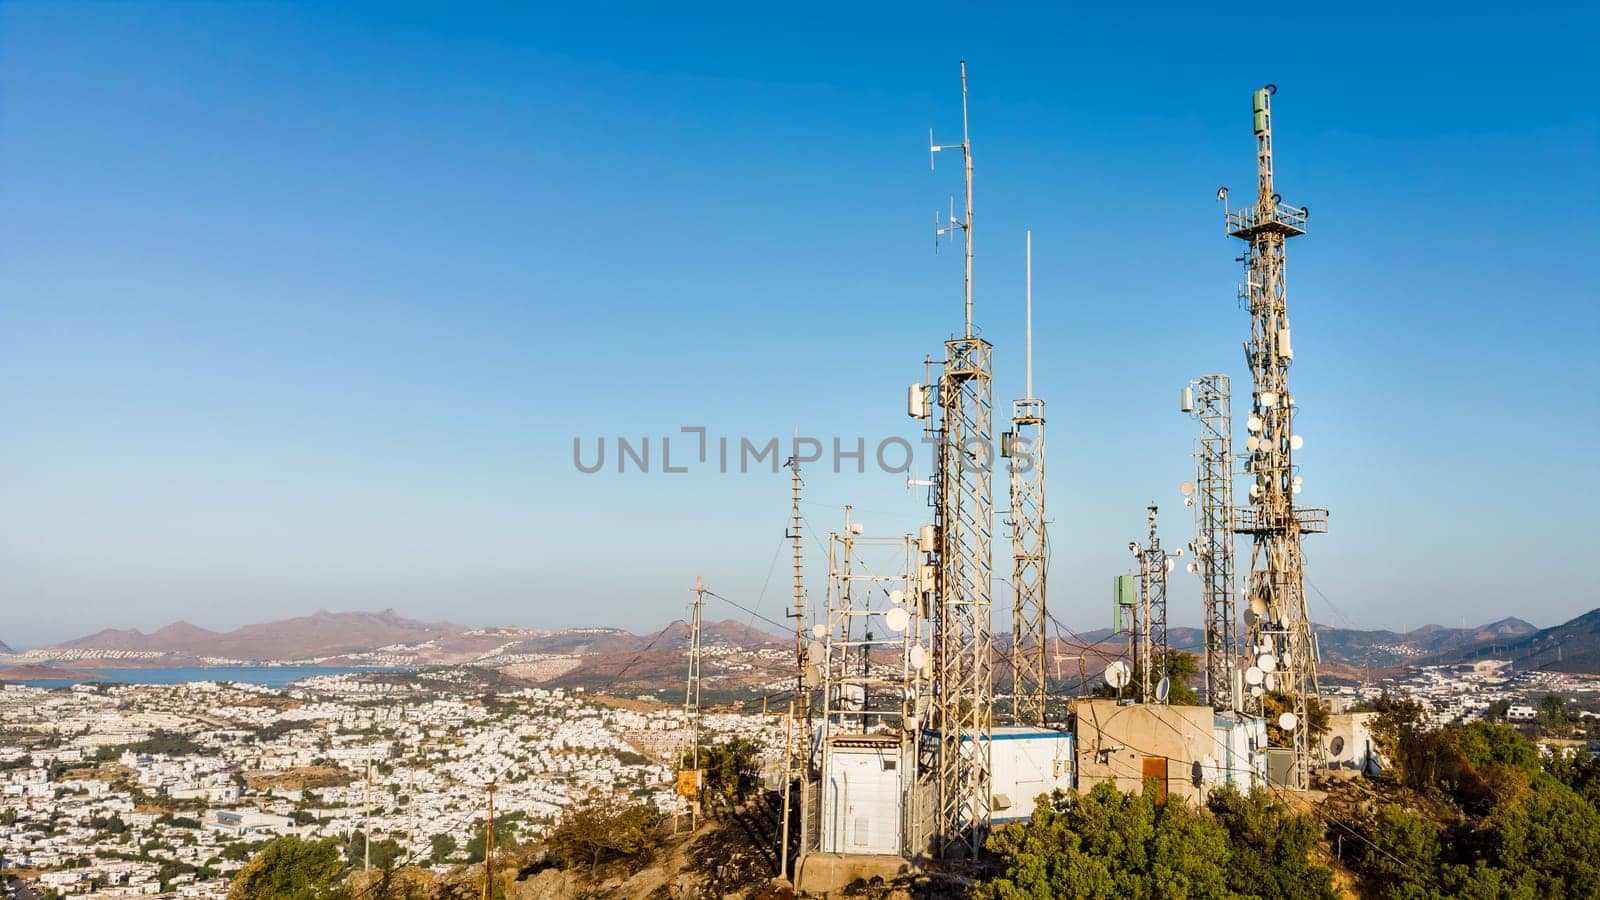 View of Telecommunication mast TV antennas at sunrise on mountain with city on background. Antenna Telephone Network Communication by igor010